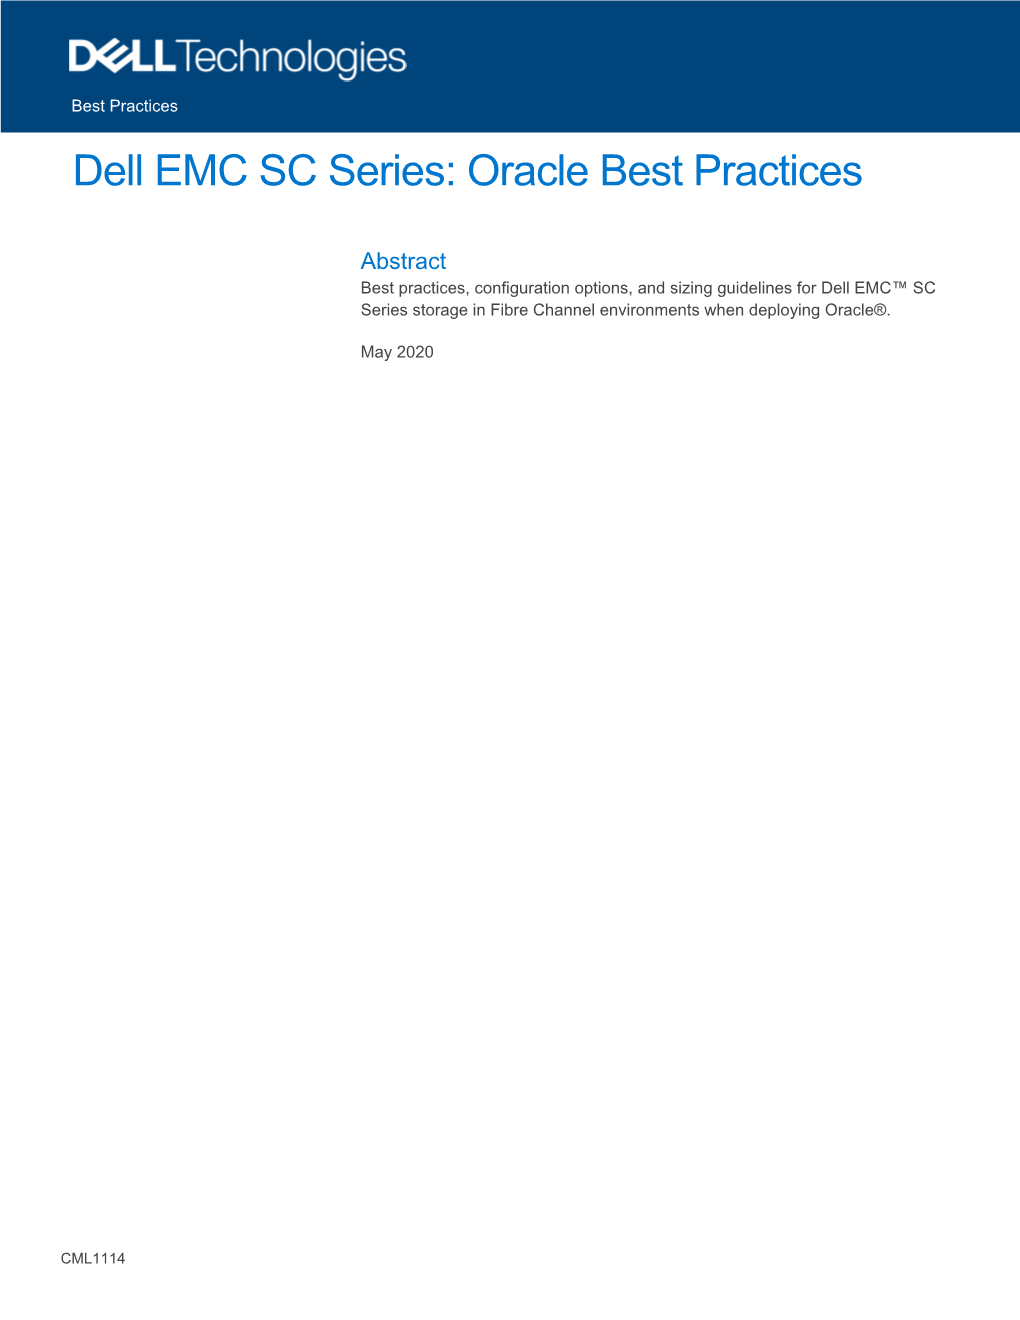 Dell EMC SC Series: Oracle Best Practices